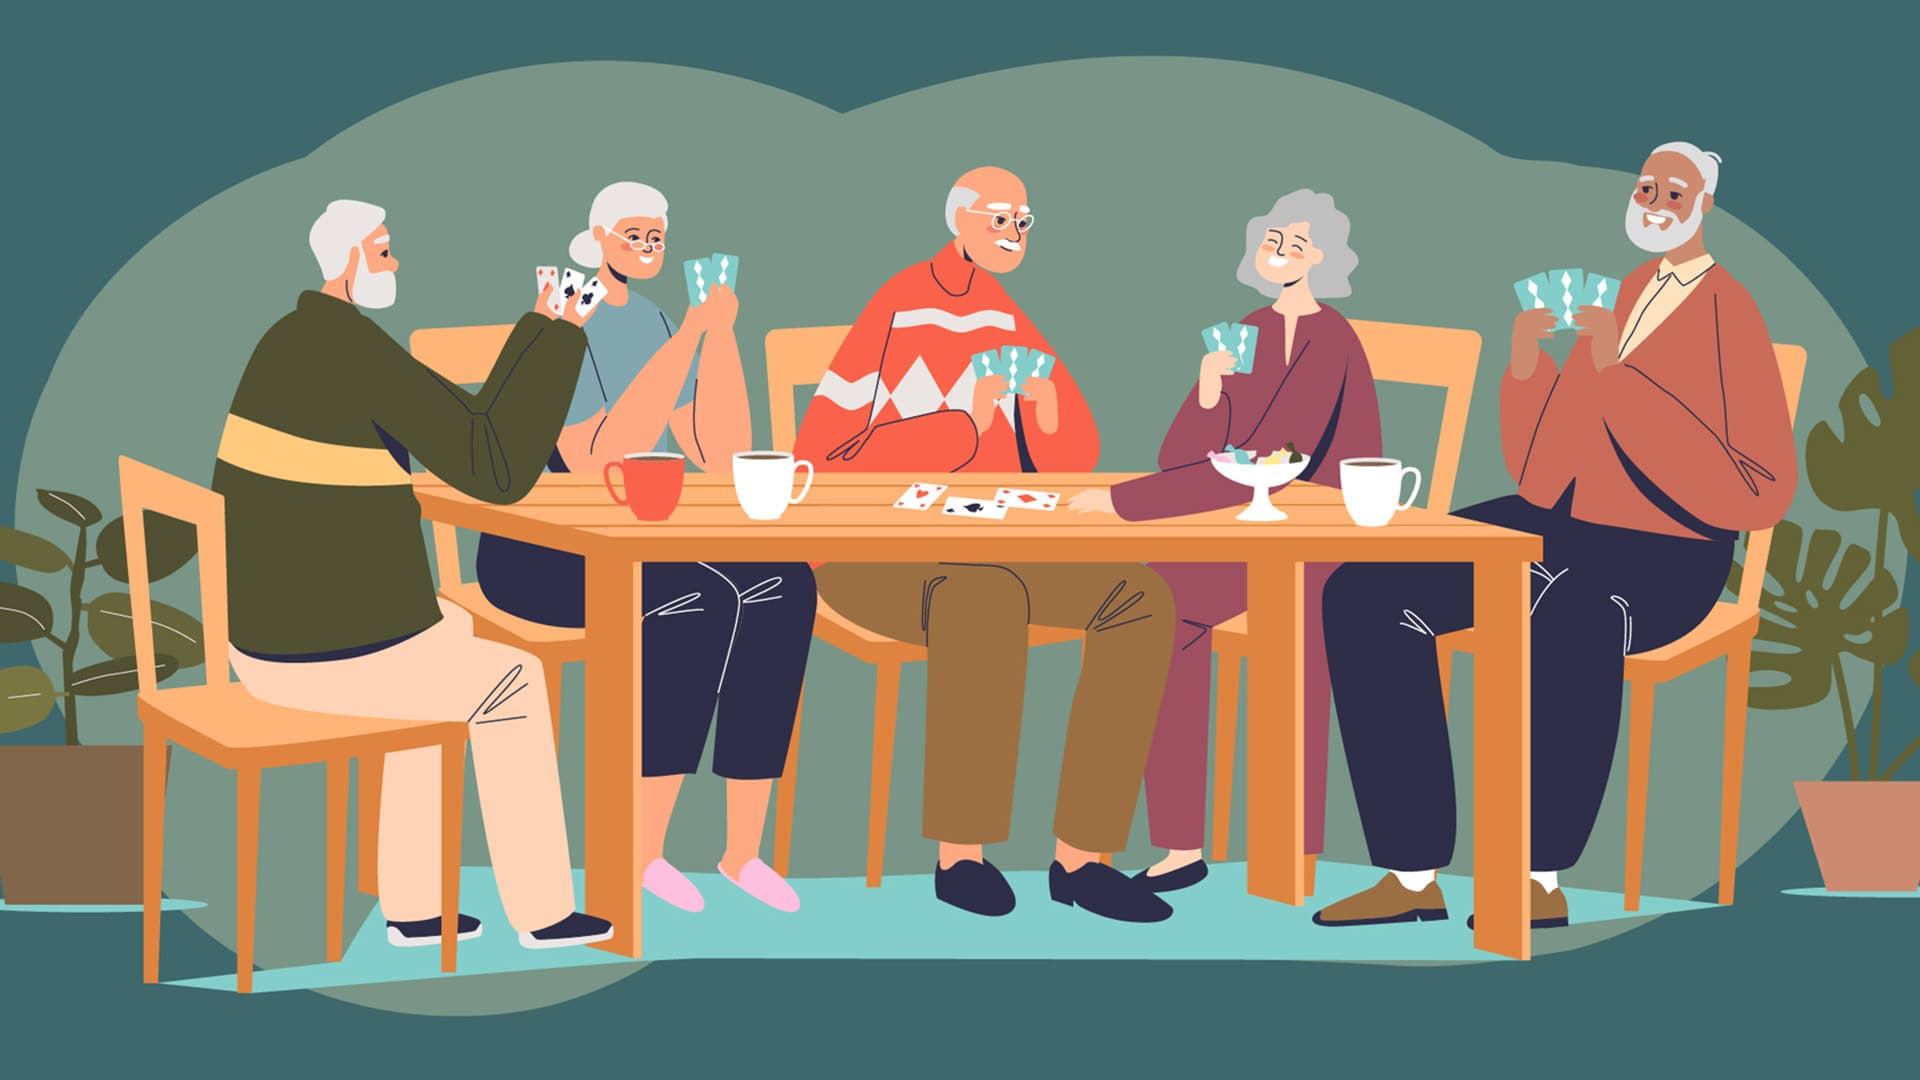 Illustration of older people gather around a table playing cards